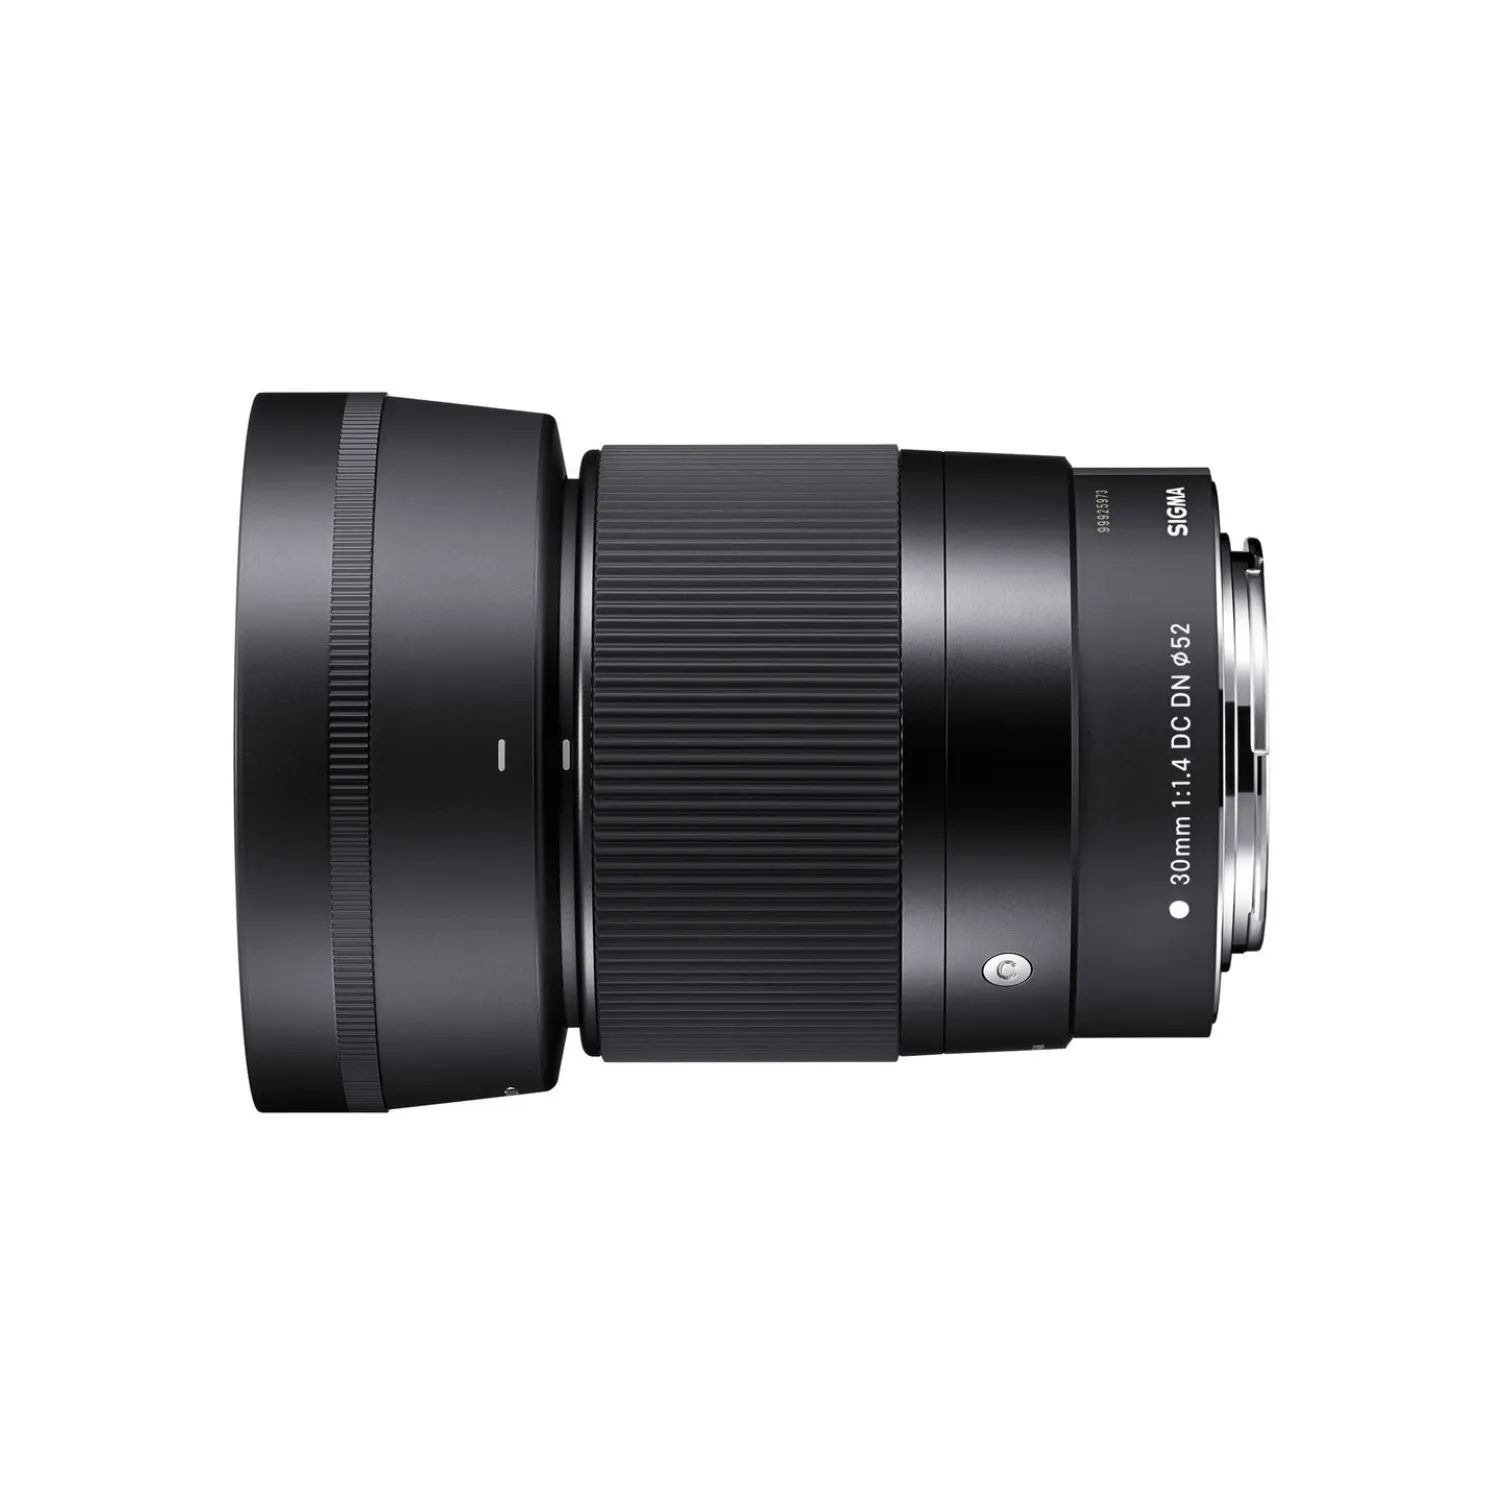 Sigma 30mm f/1.4 DC DN Contemporary Lens for Canon M-Mount